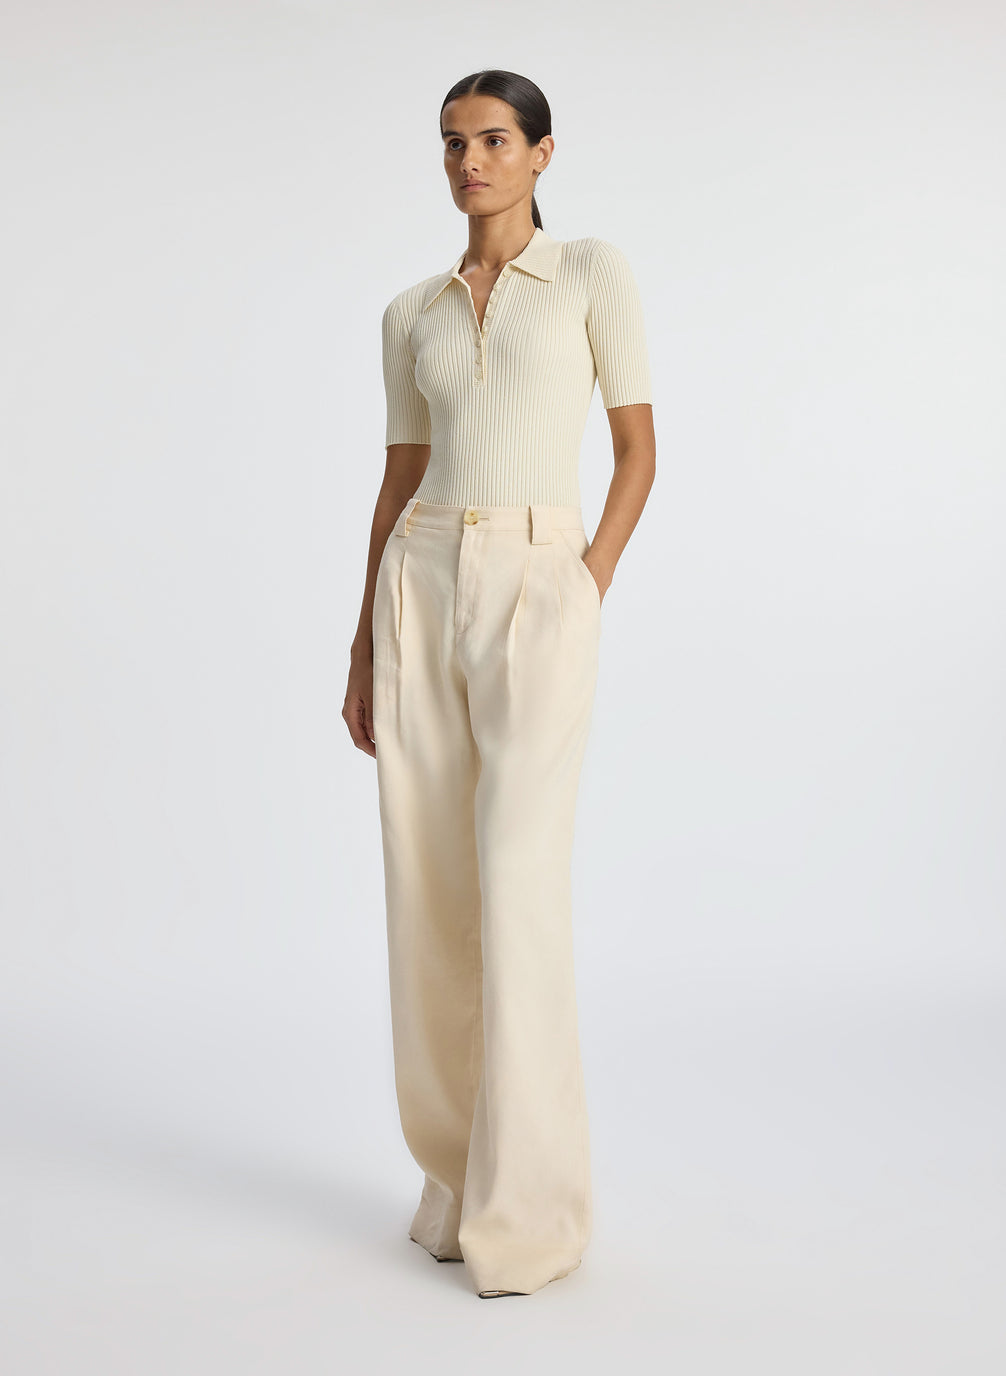 side view of woman wearing cream short sleeve collared top and beige pants